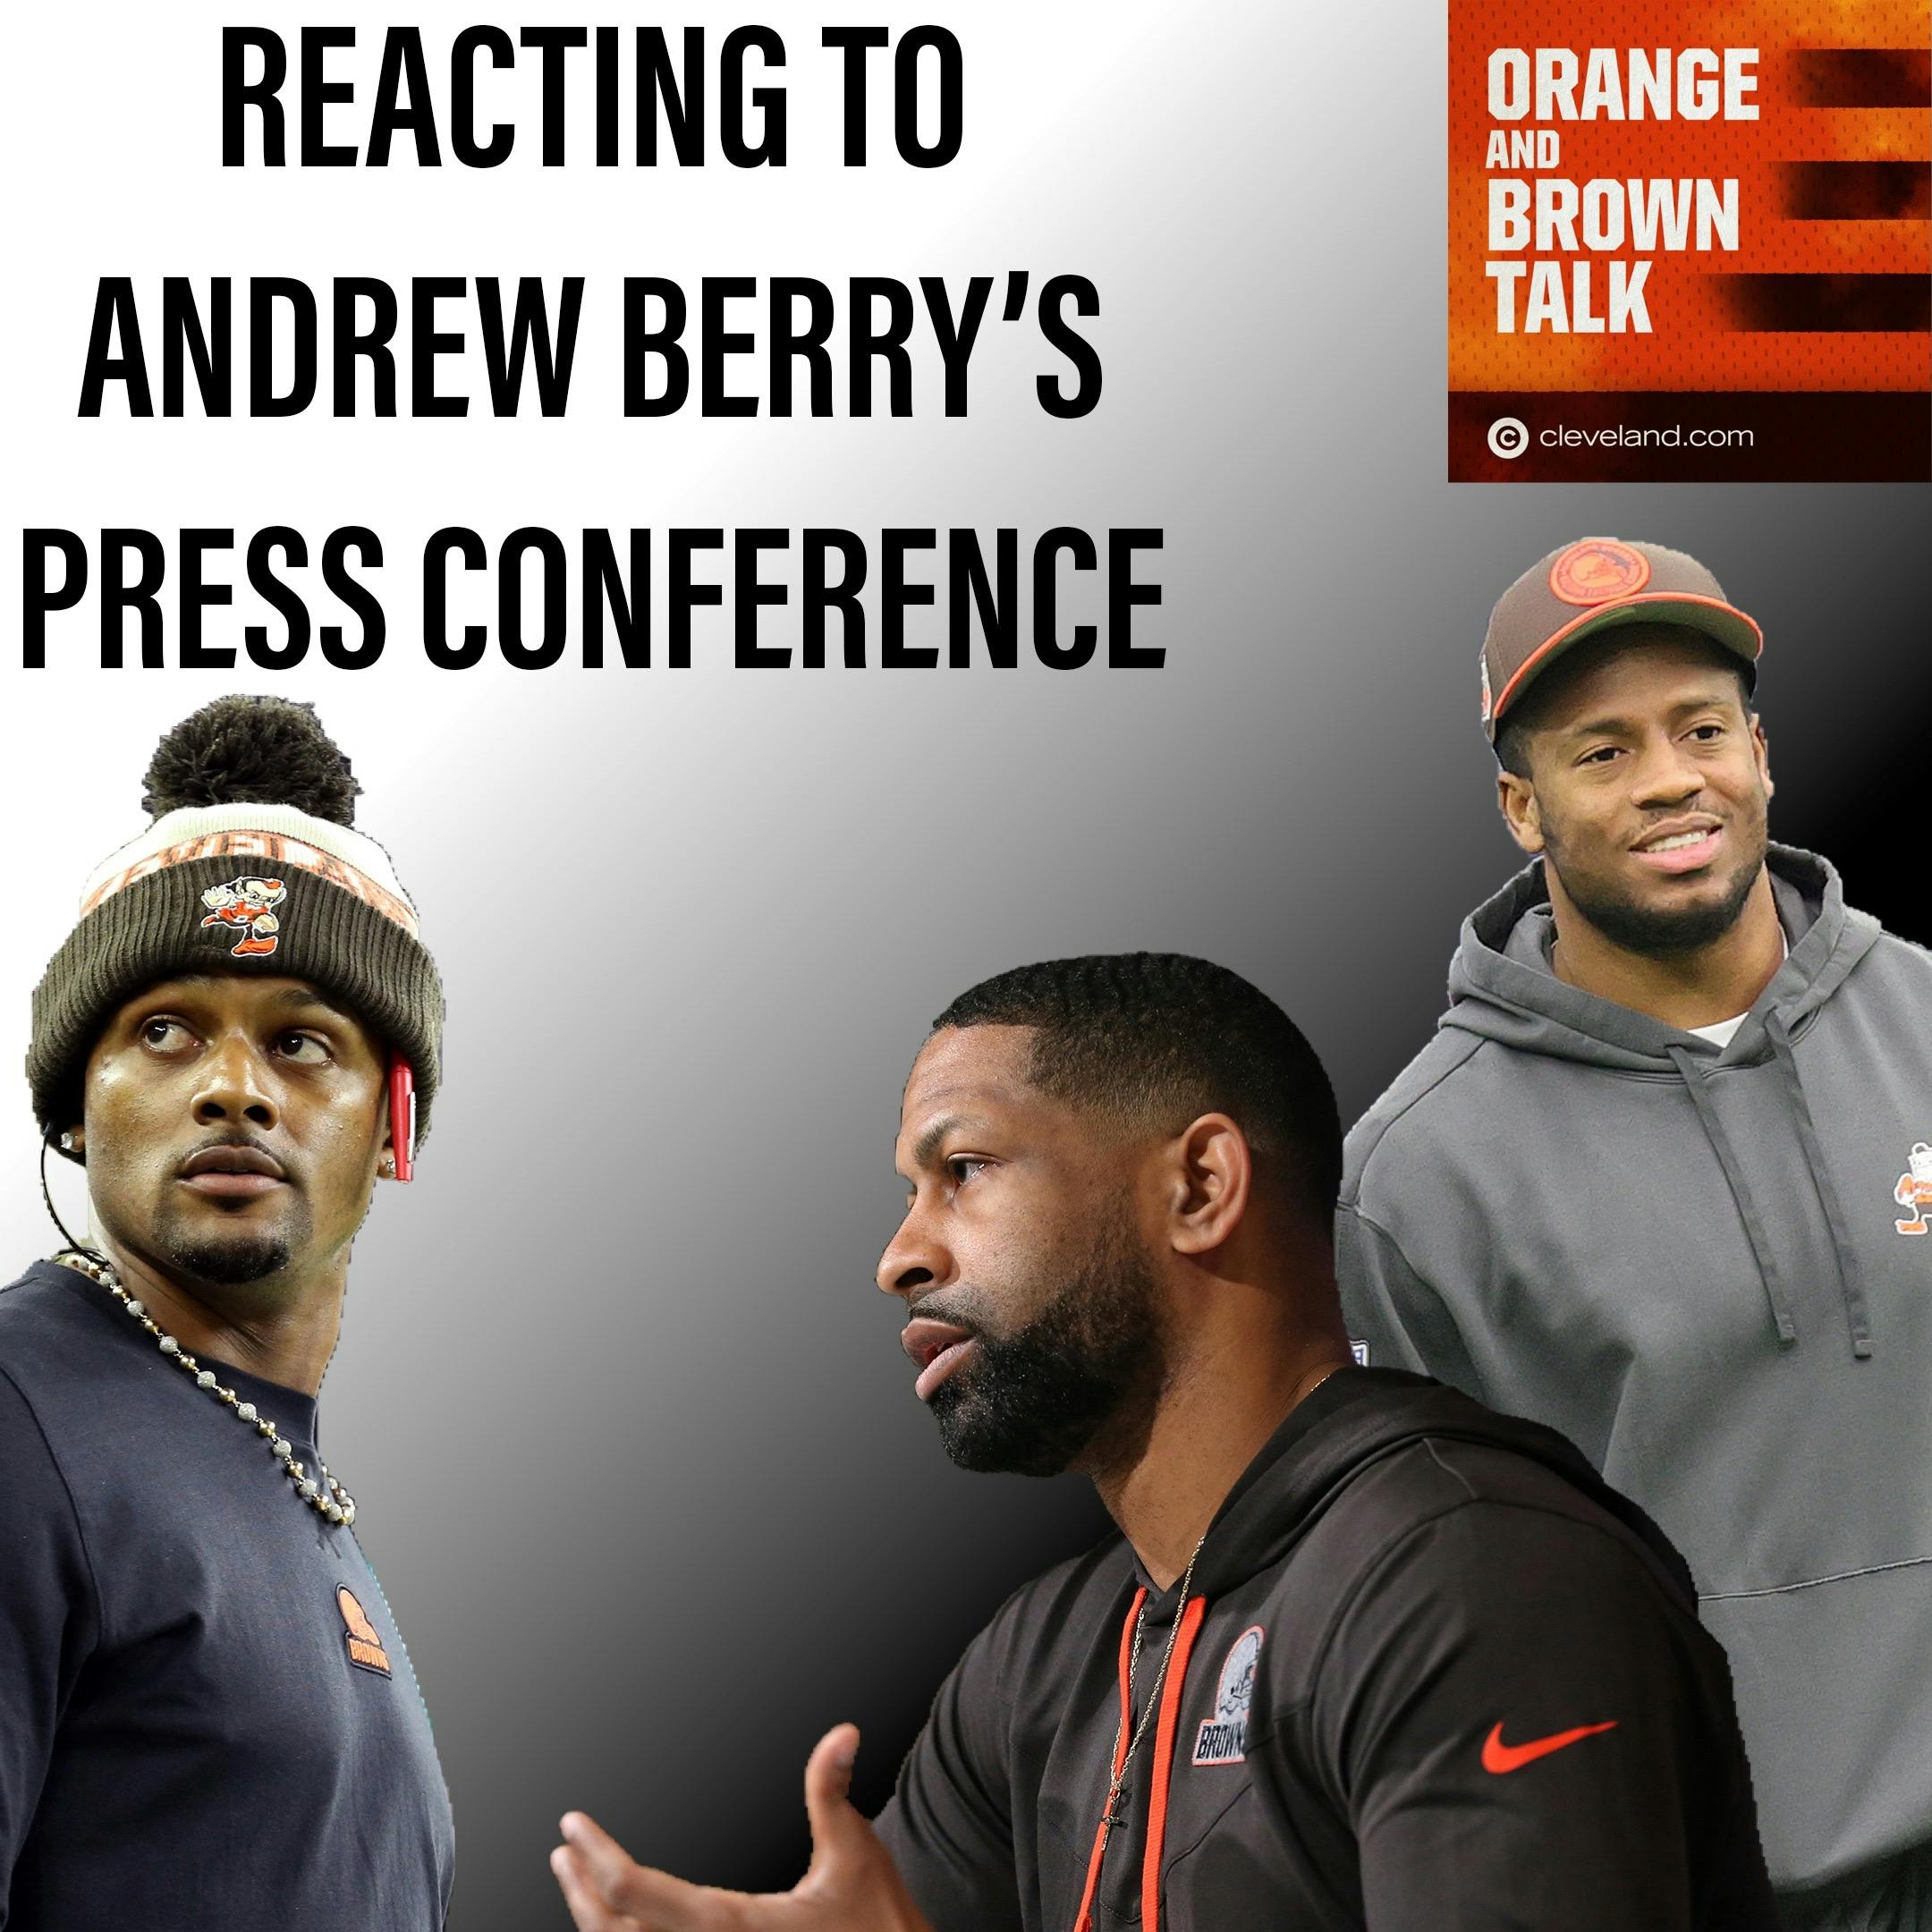 Deshaun Watson and Joe Flacco can coexist on the Browns and more reaction to Andrew Berry’s press conference